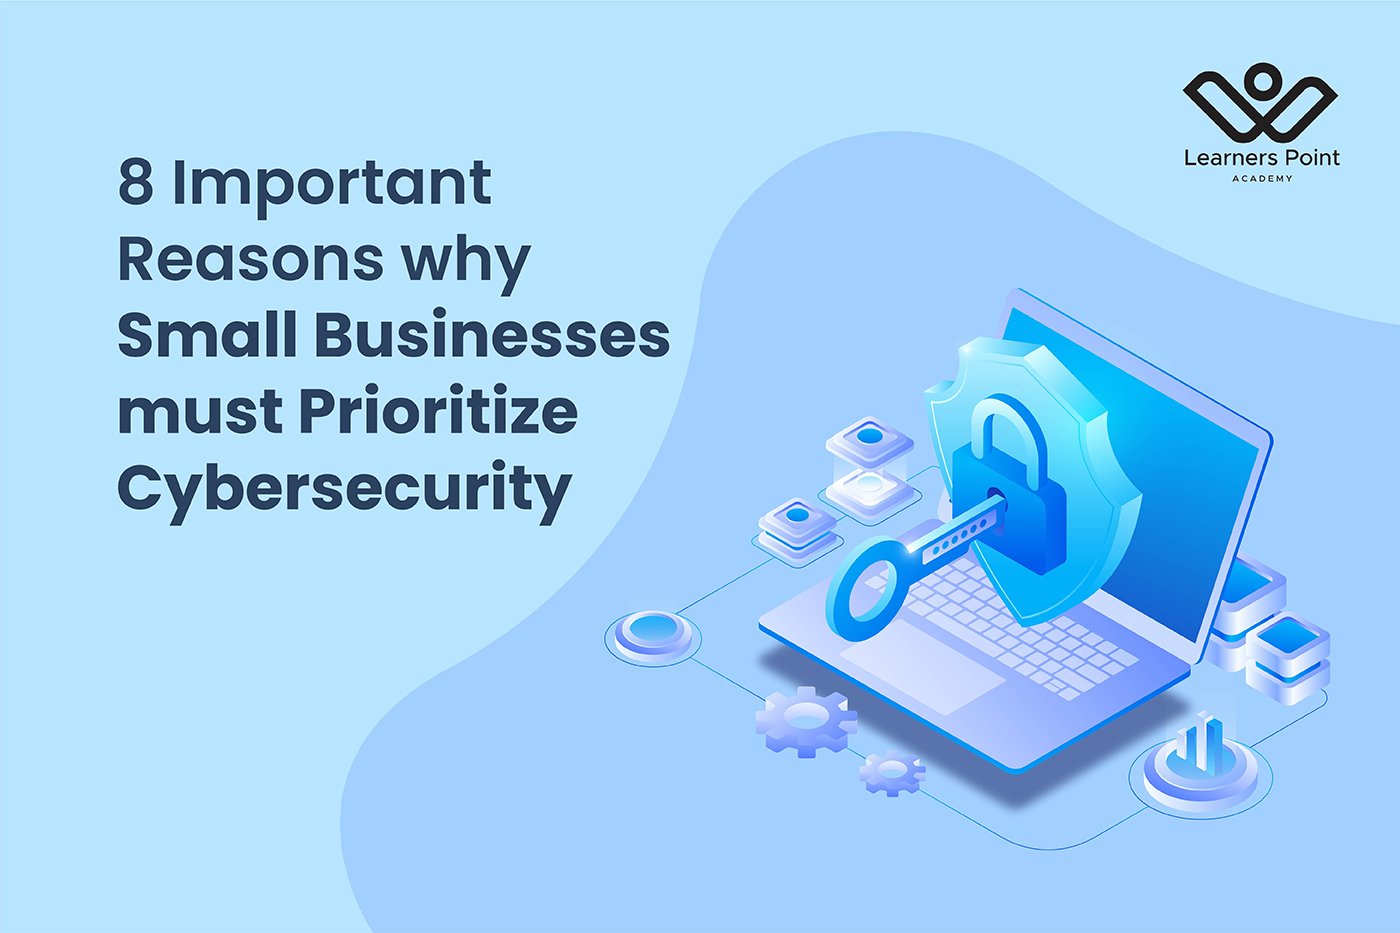 8 Important Reasons why Small Businesses must Prioritize Cybersecurity